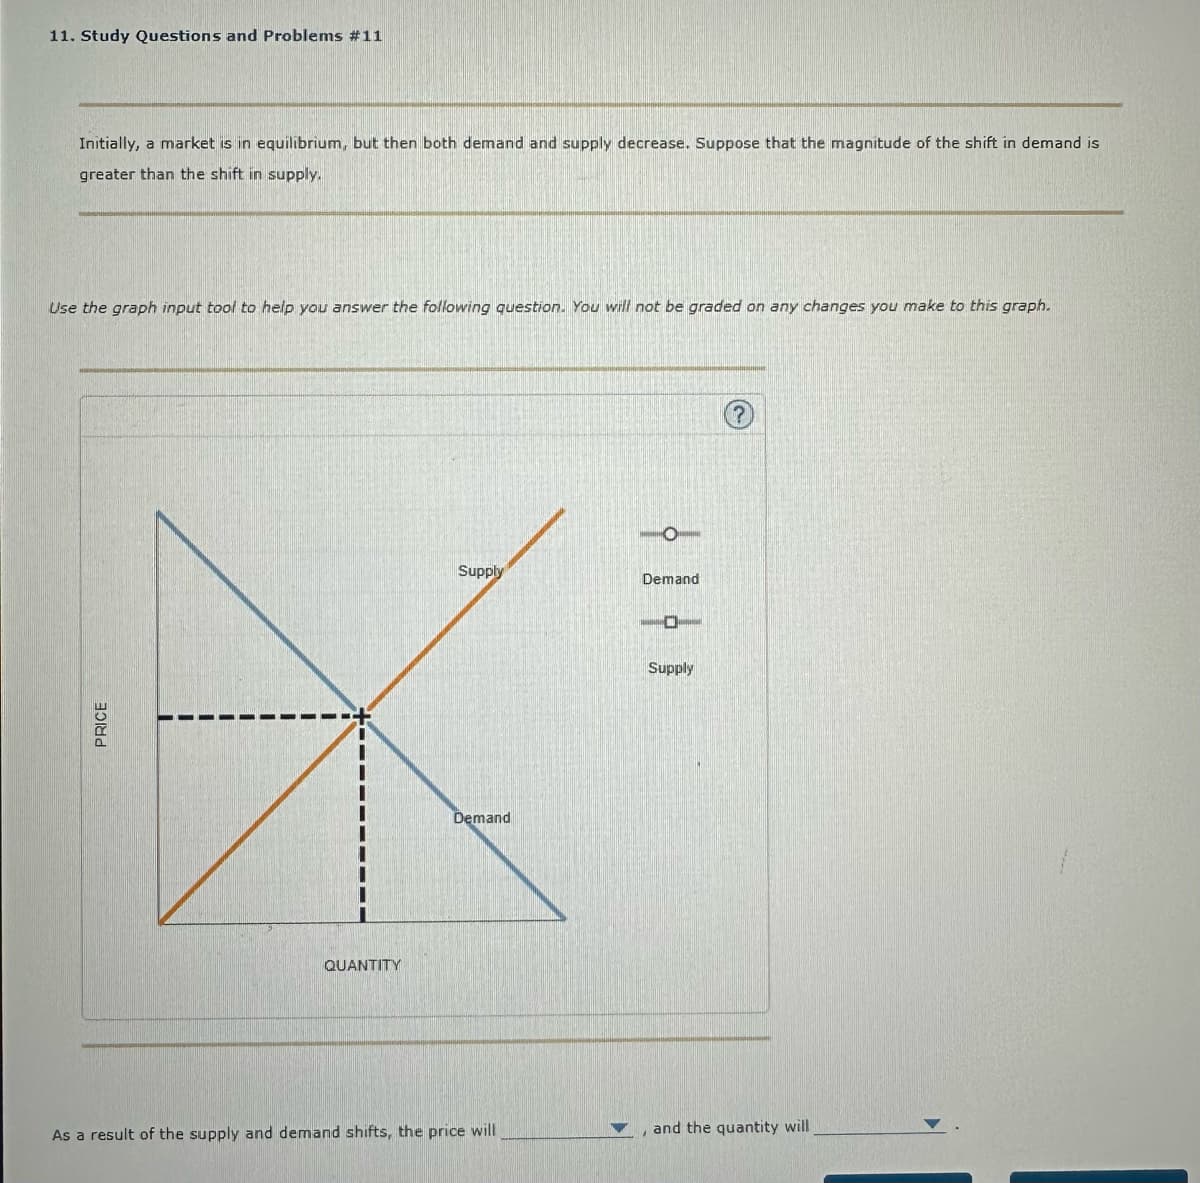 11. Study Questions and Problems #11
Initially, a market is in equilibrium, but then both demand and supply decrease. Suppose that the magnitude of the shift in demand is
greater than the shift in supply.
Use the graph input tool to help you answer the following question. You will not be graded on any changes you make to this graph.
PRICE
QUANTITY
Supply
Demand
As a result of the supply and demand shifts, the price will
Demand
--
Supply
, and the quantity will